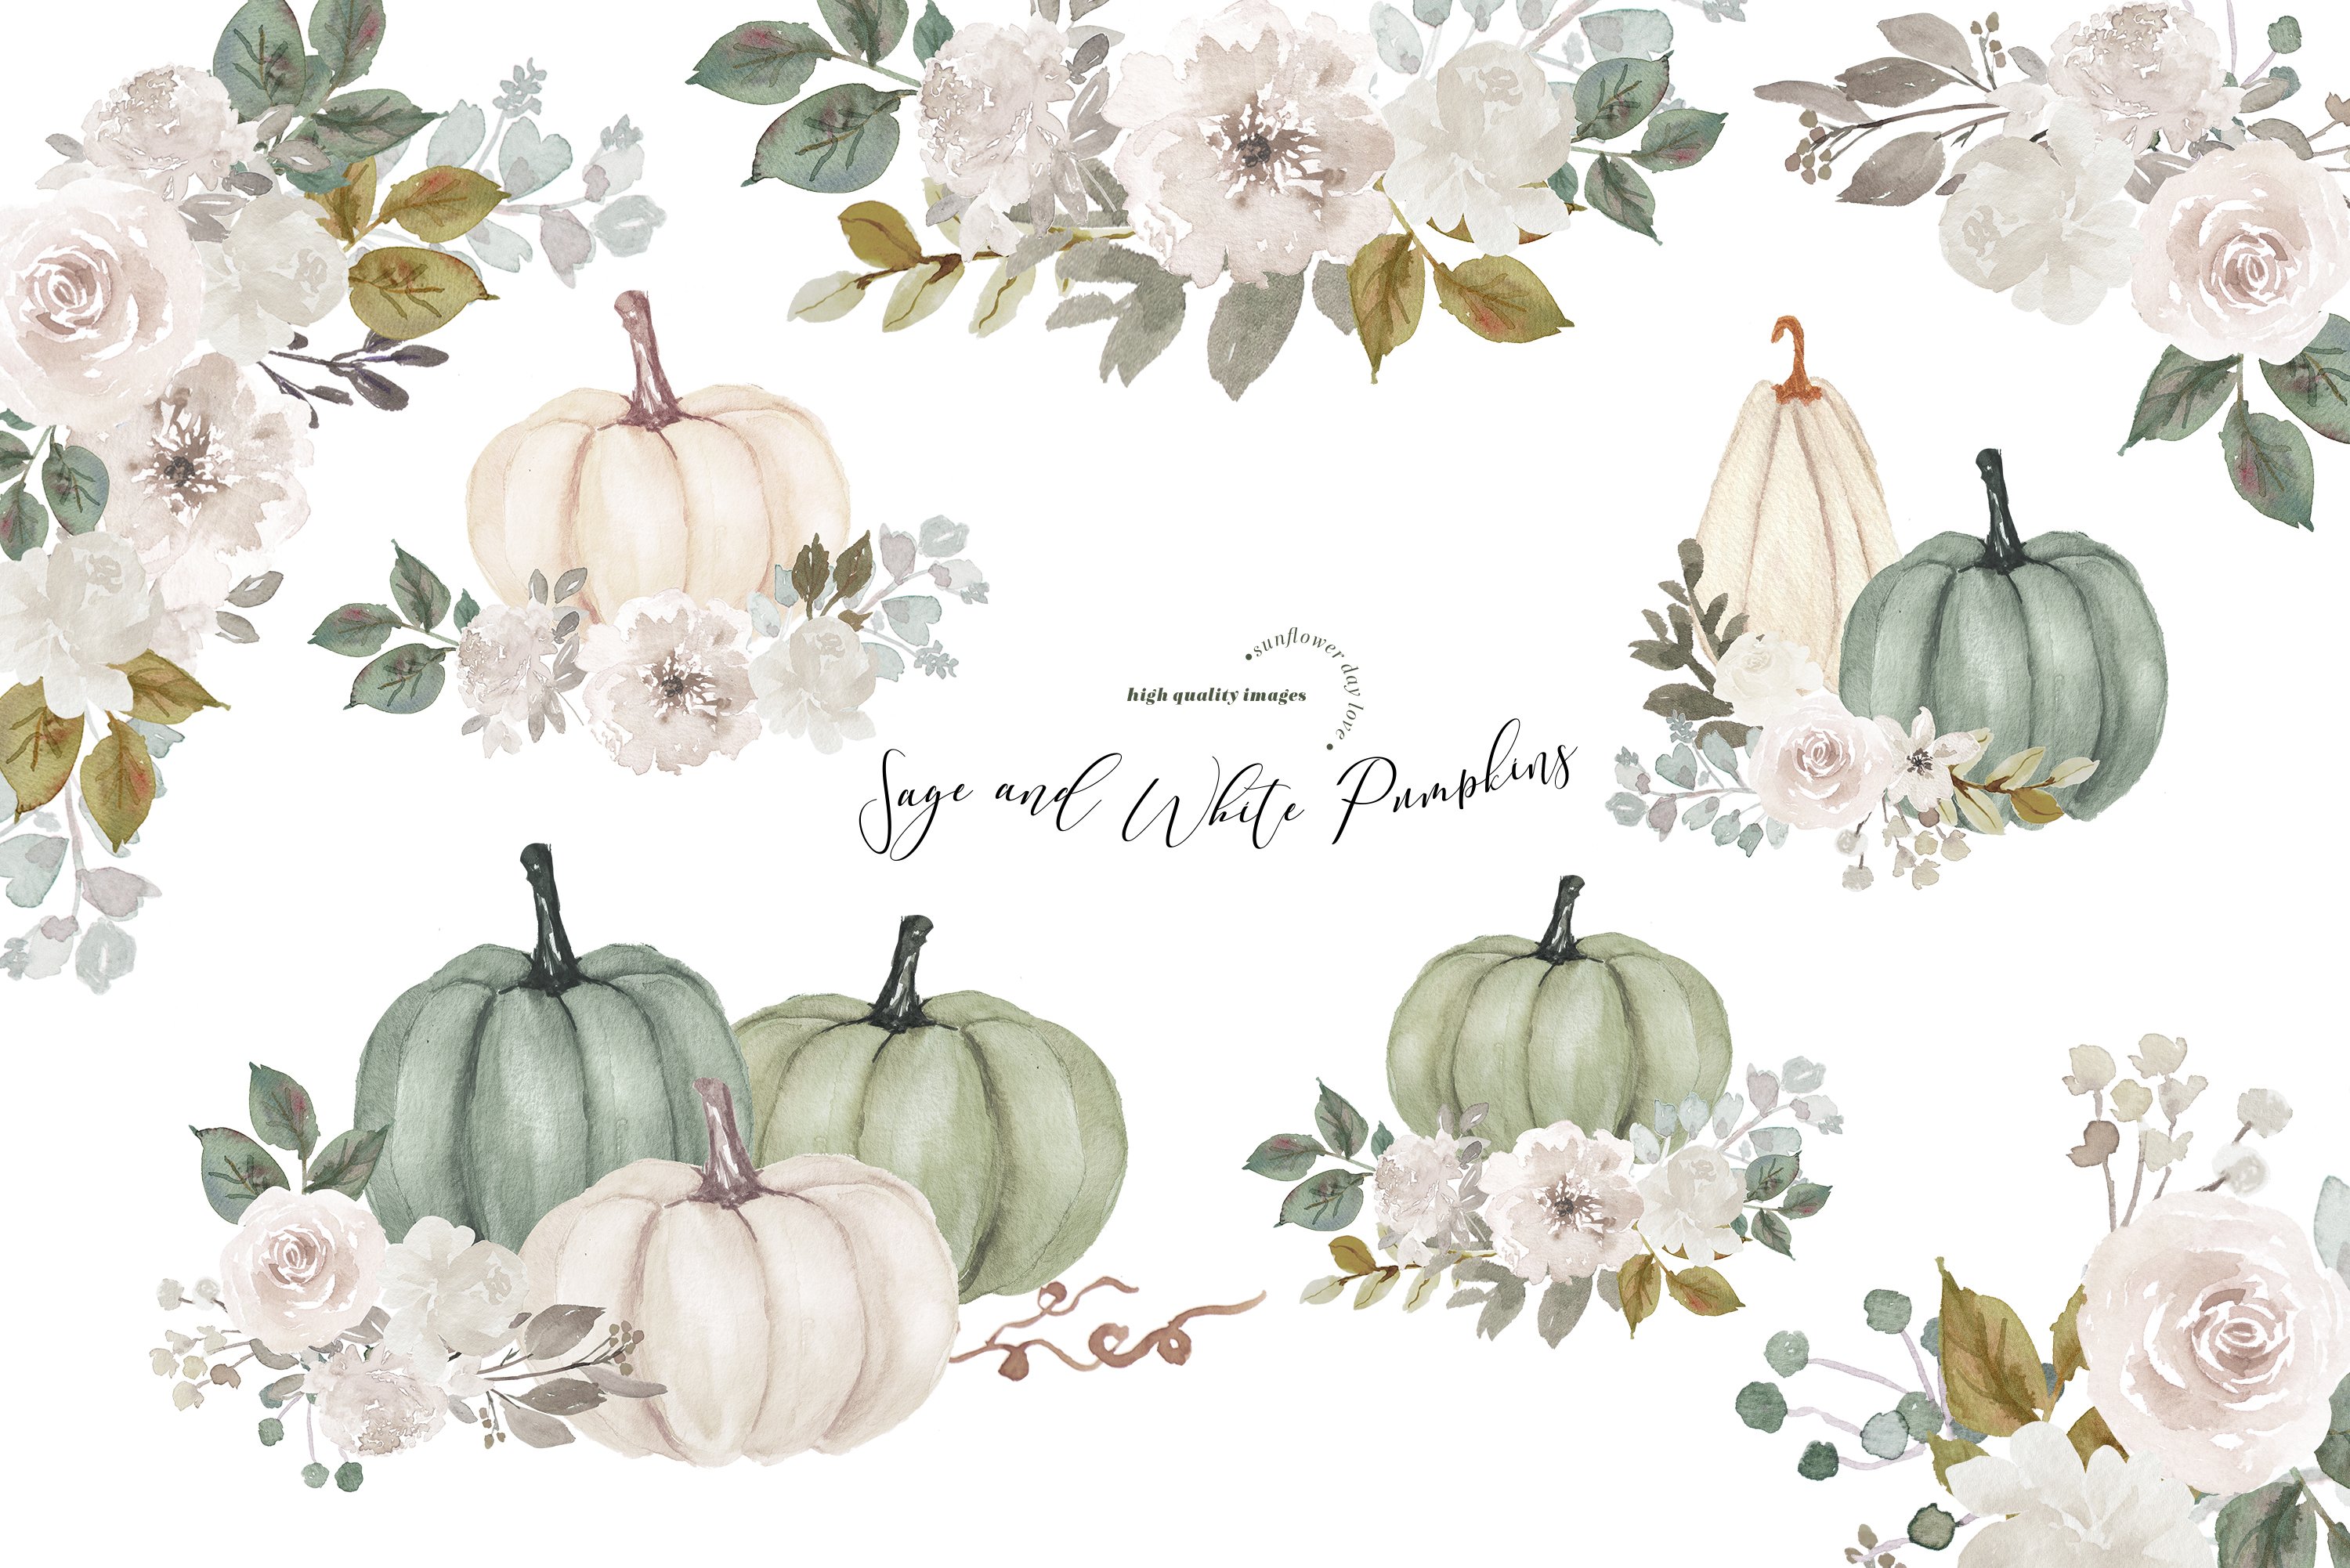 Light green pumpkins and flowers on this composition.